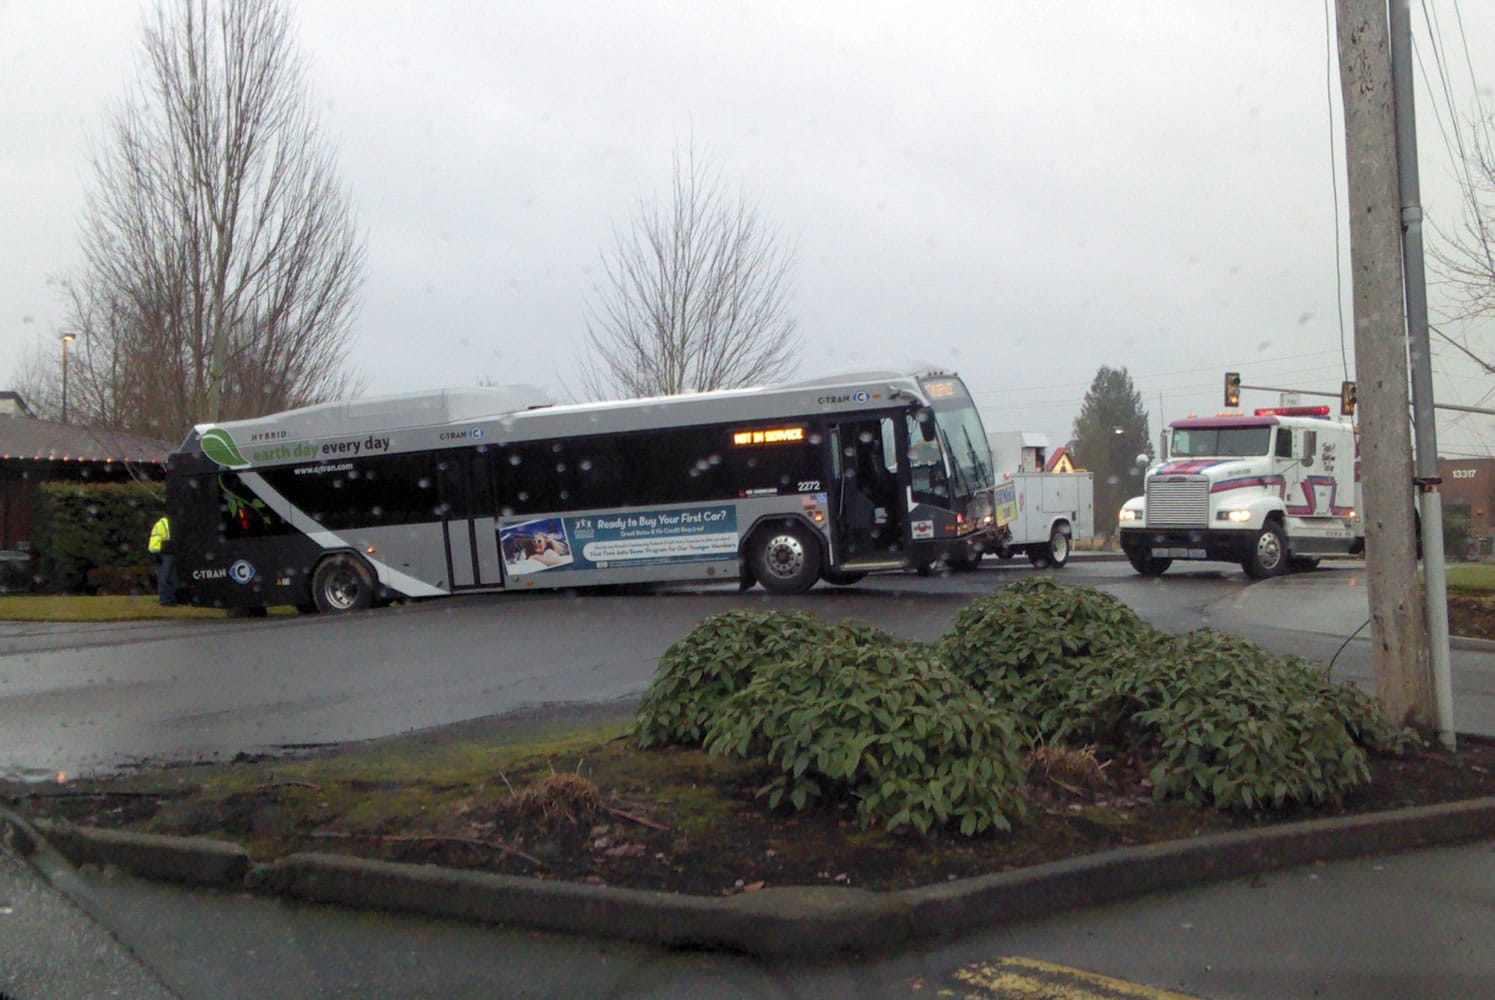 This C-Tran bus got stuck in a Salmon Creek fire station driveway around 6:45 a.m.